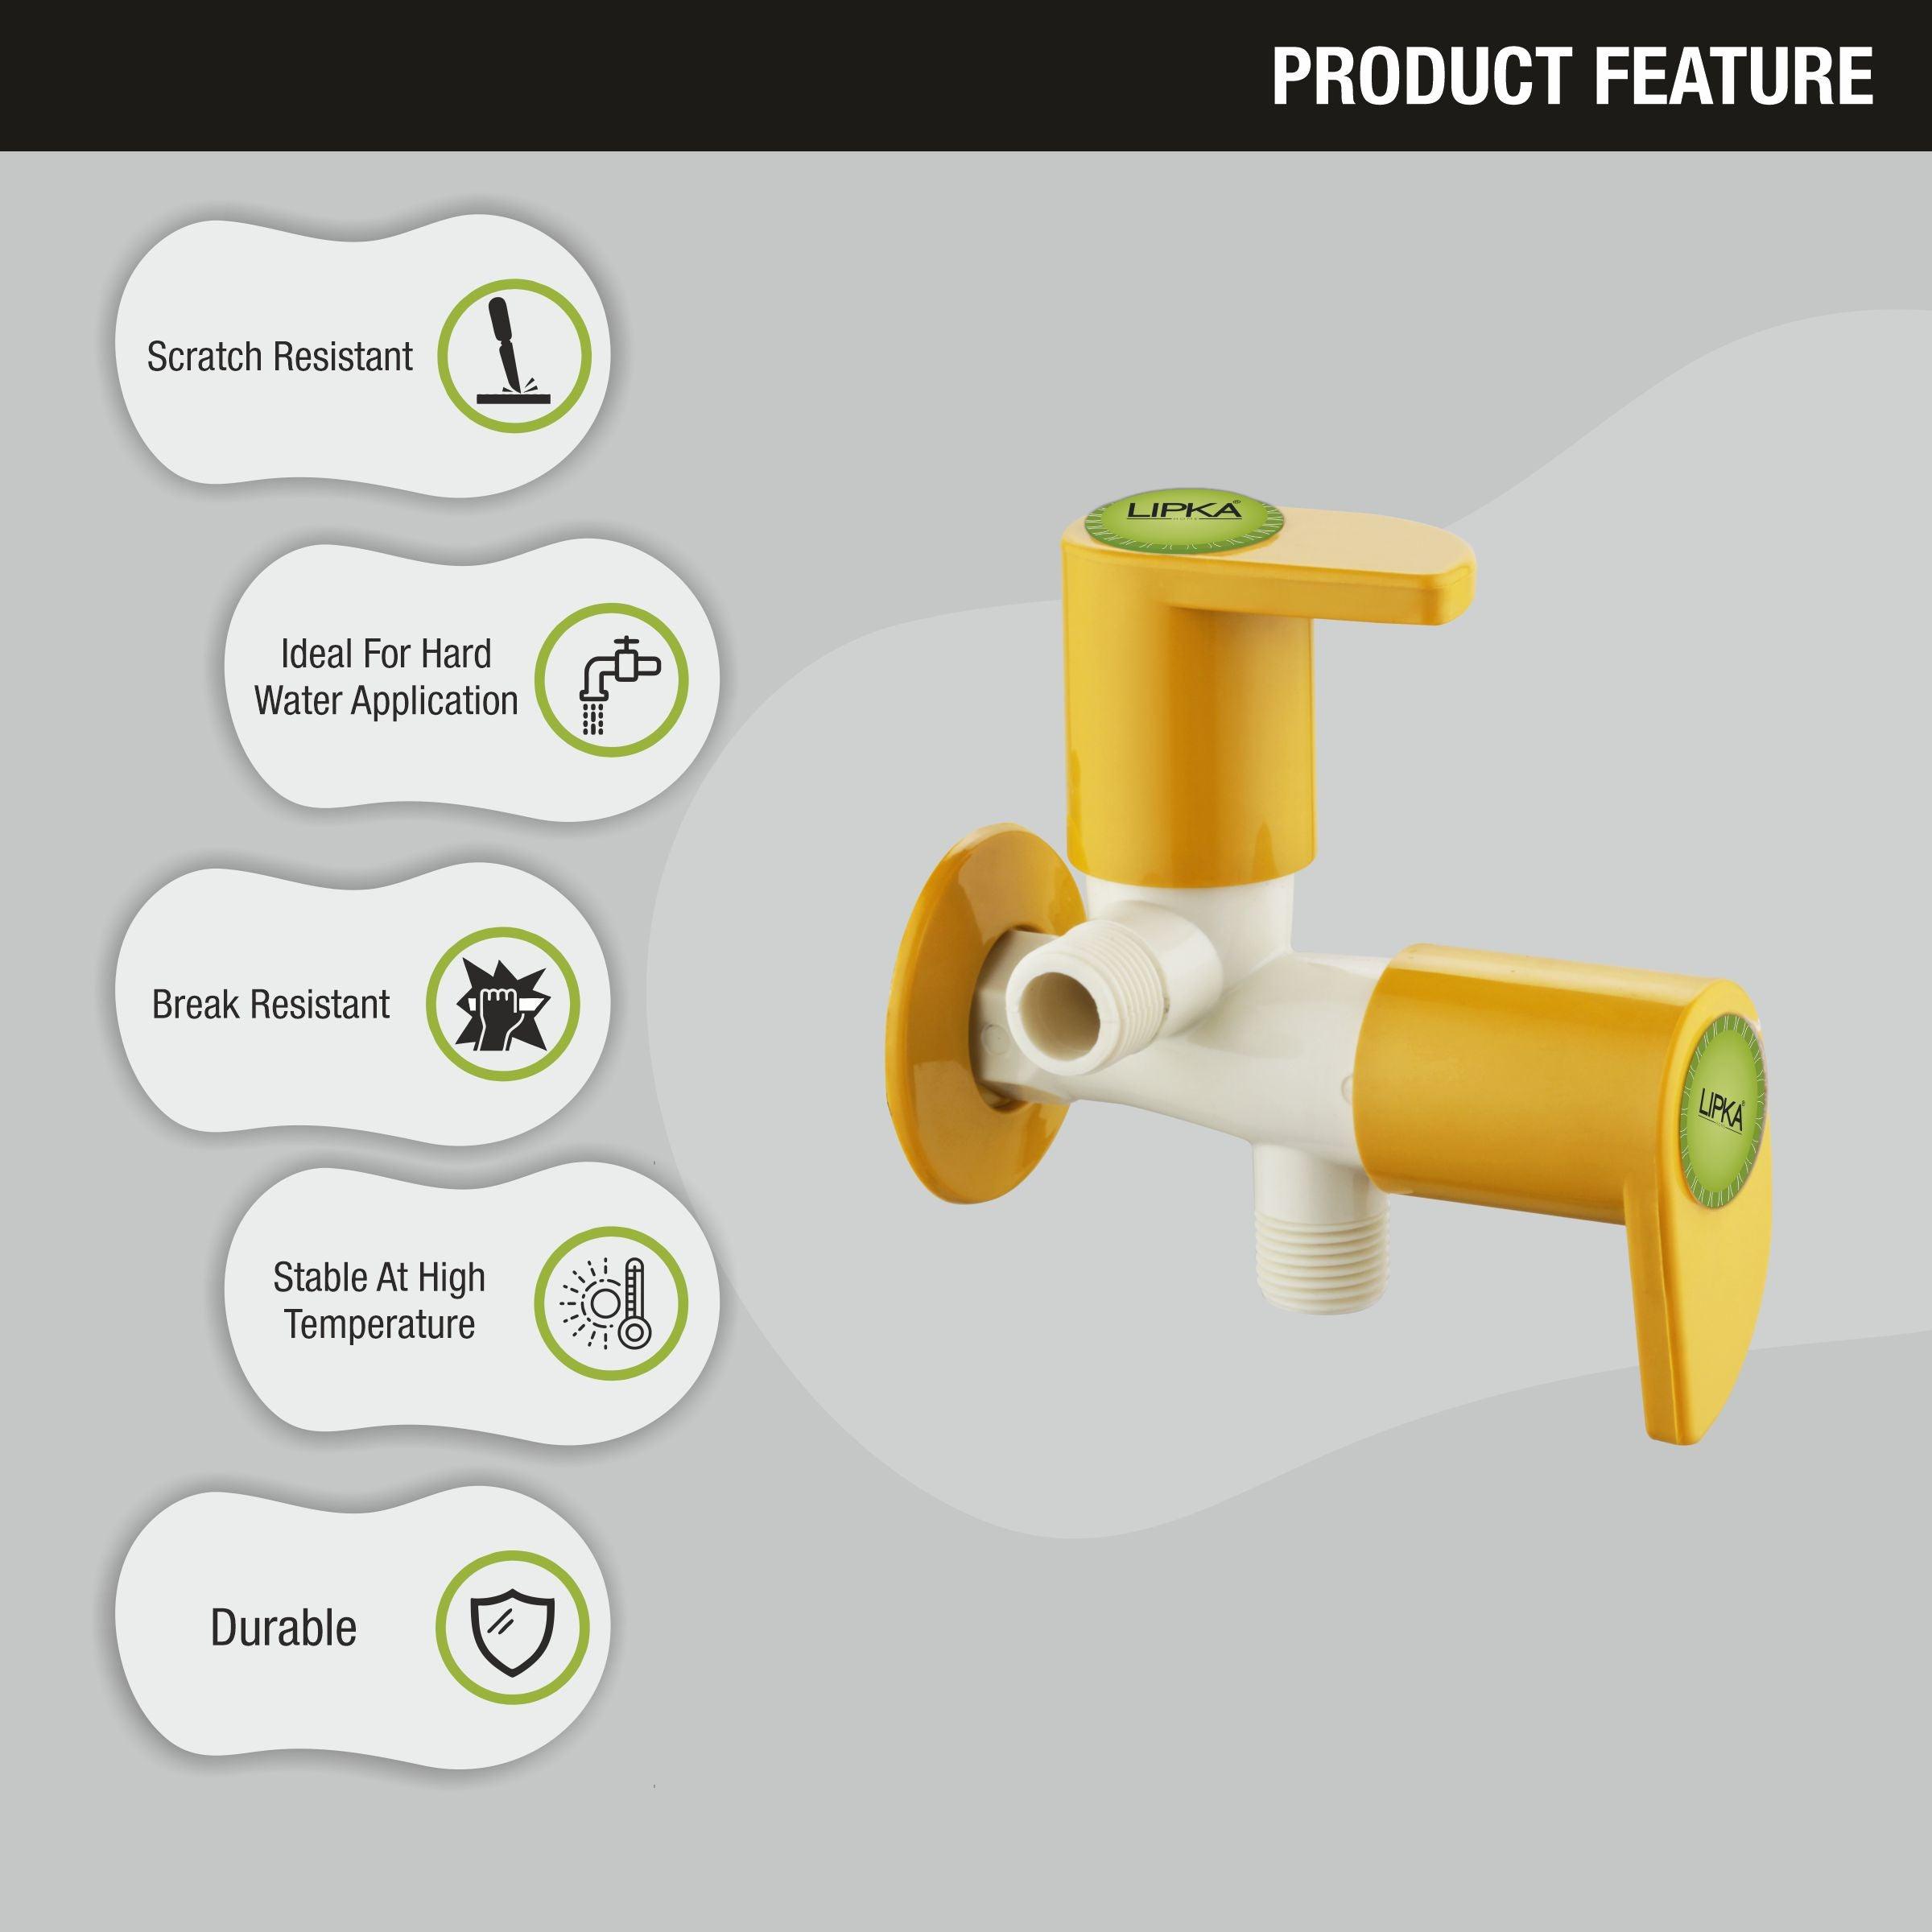 Pecker Two Way Angle Valve PTMT Faucet (Double Handle) features